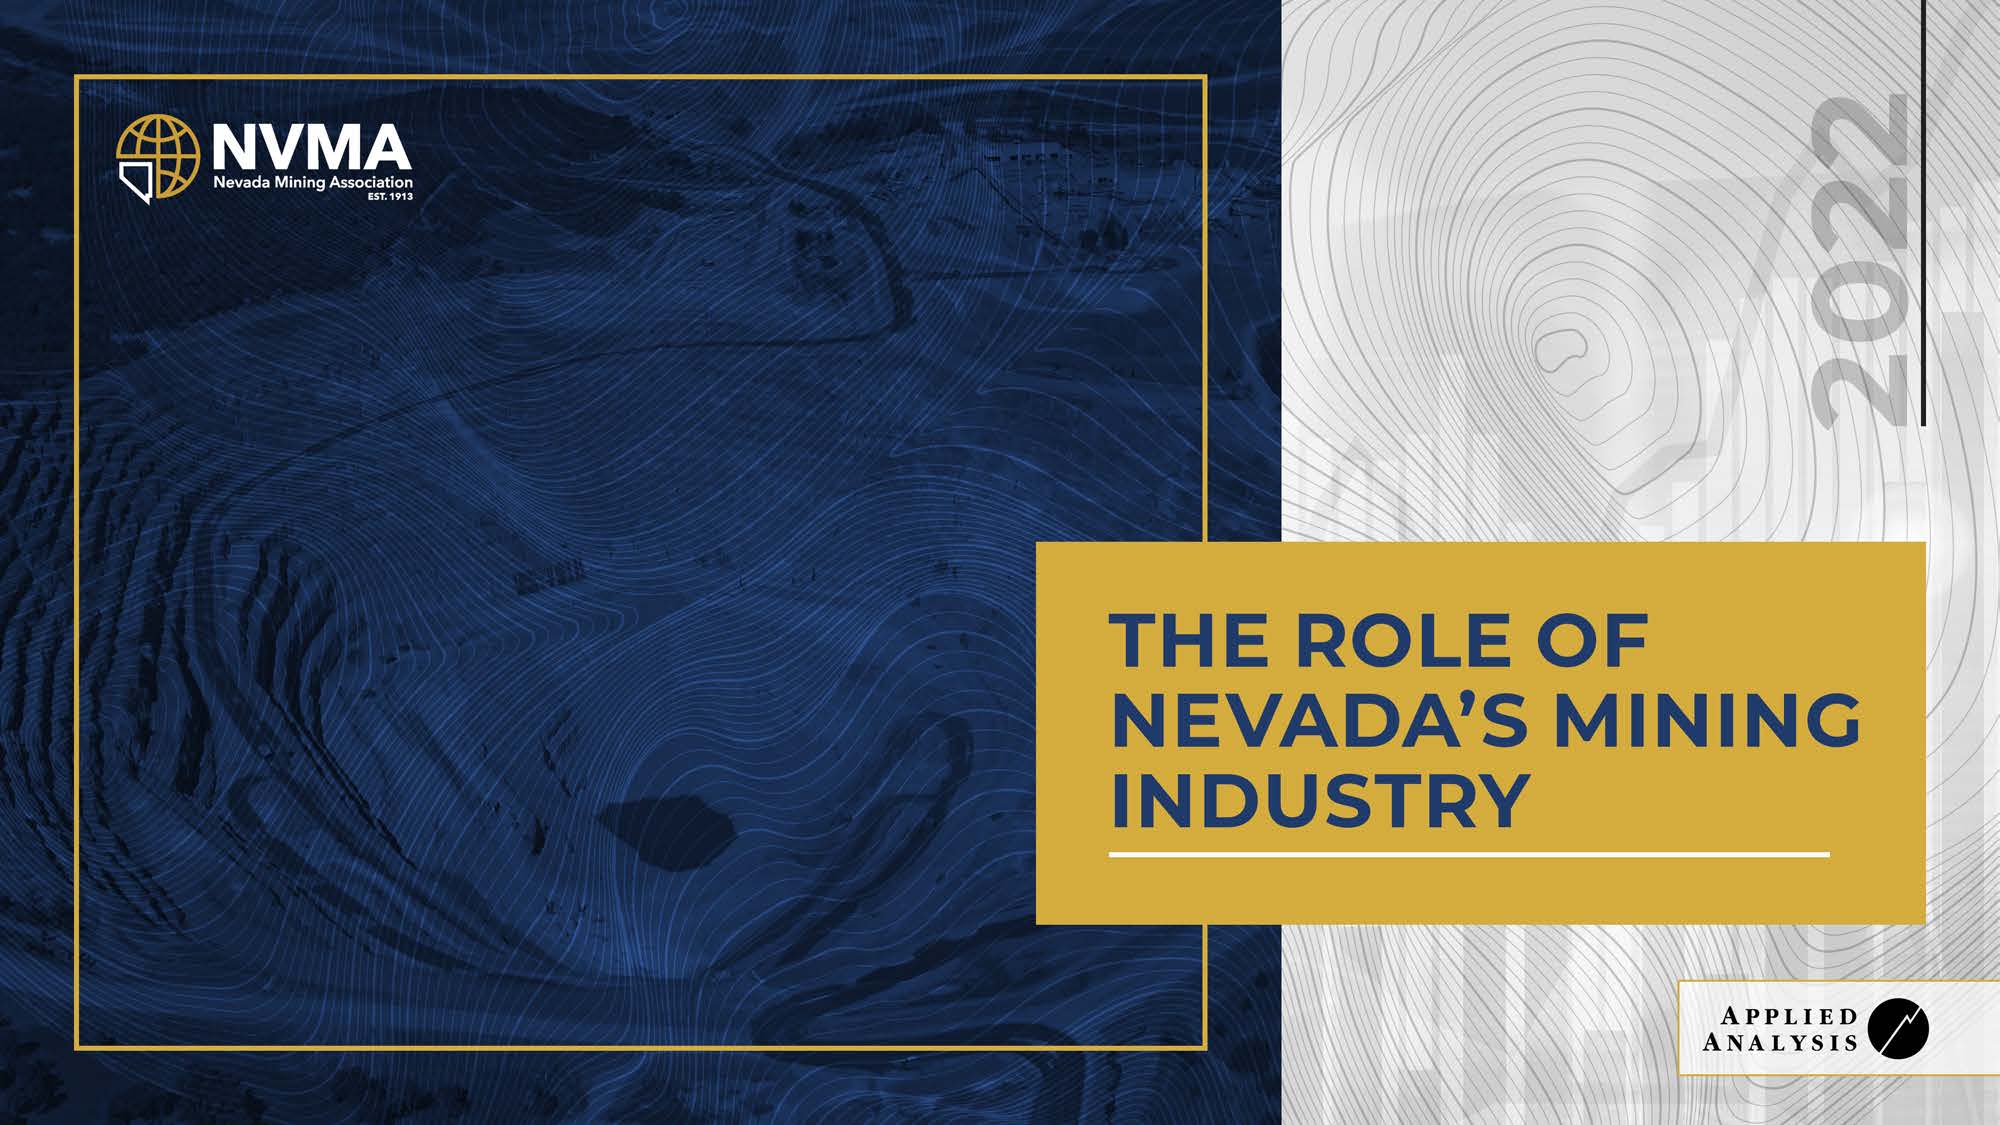 Nevada Mining Association The Role of Nevada's Mining Industry